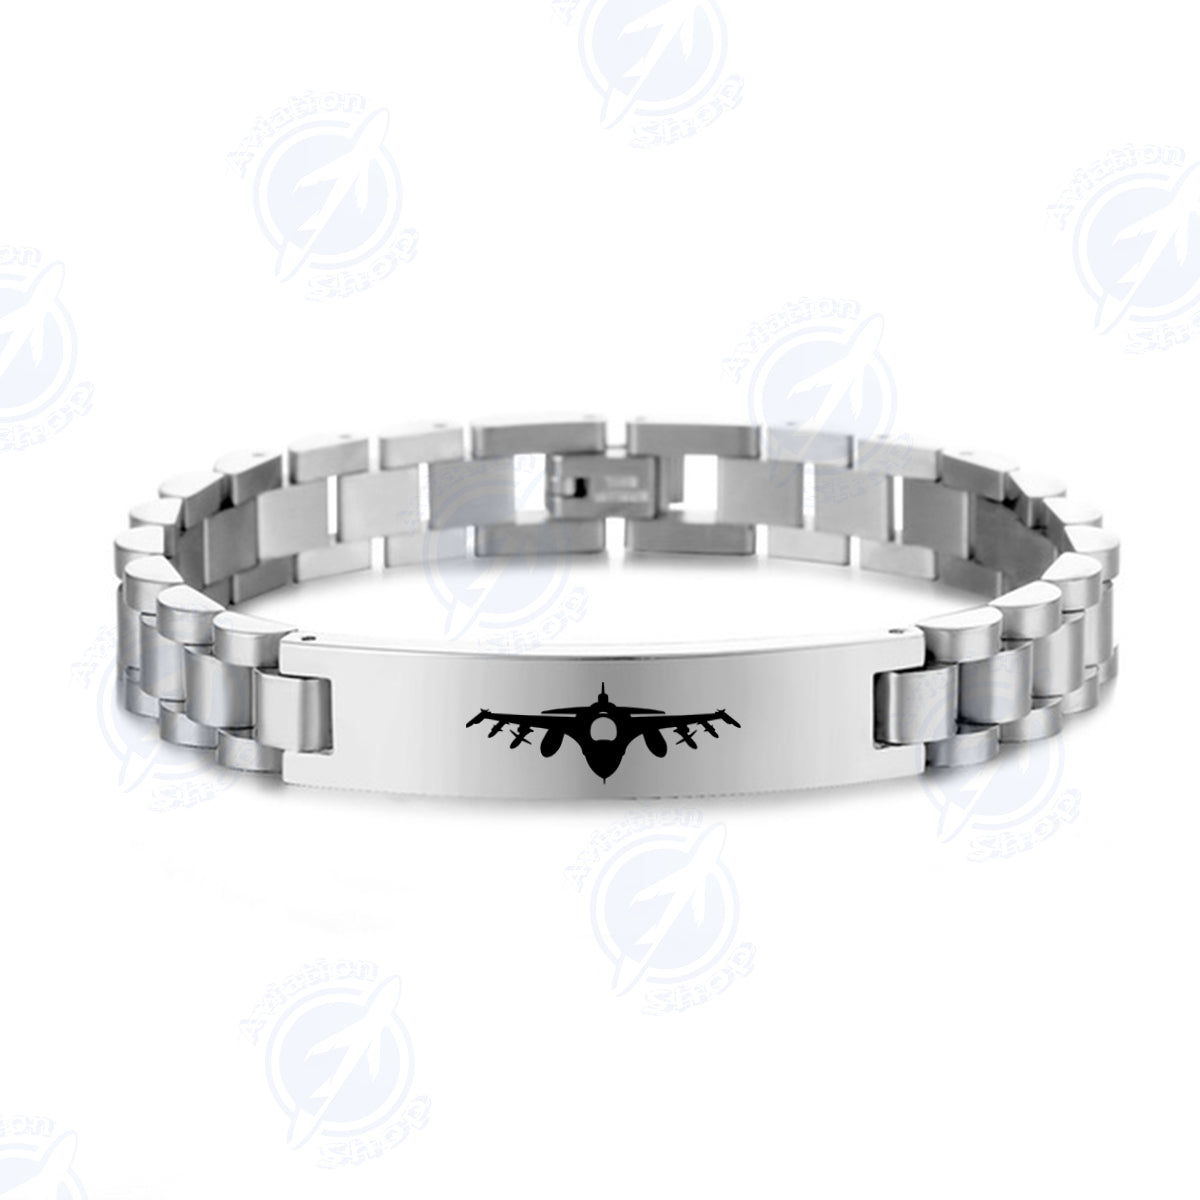 Fighting Falcon F16 Silhouette Designed Stainless Steel Chain Bracelets